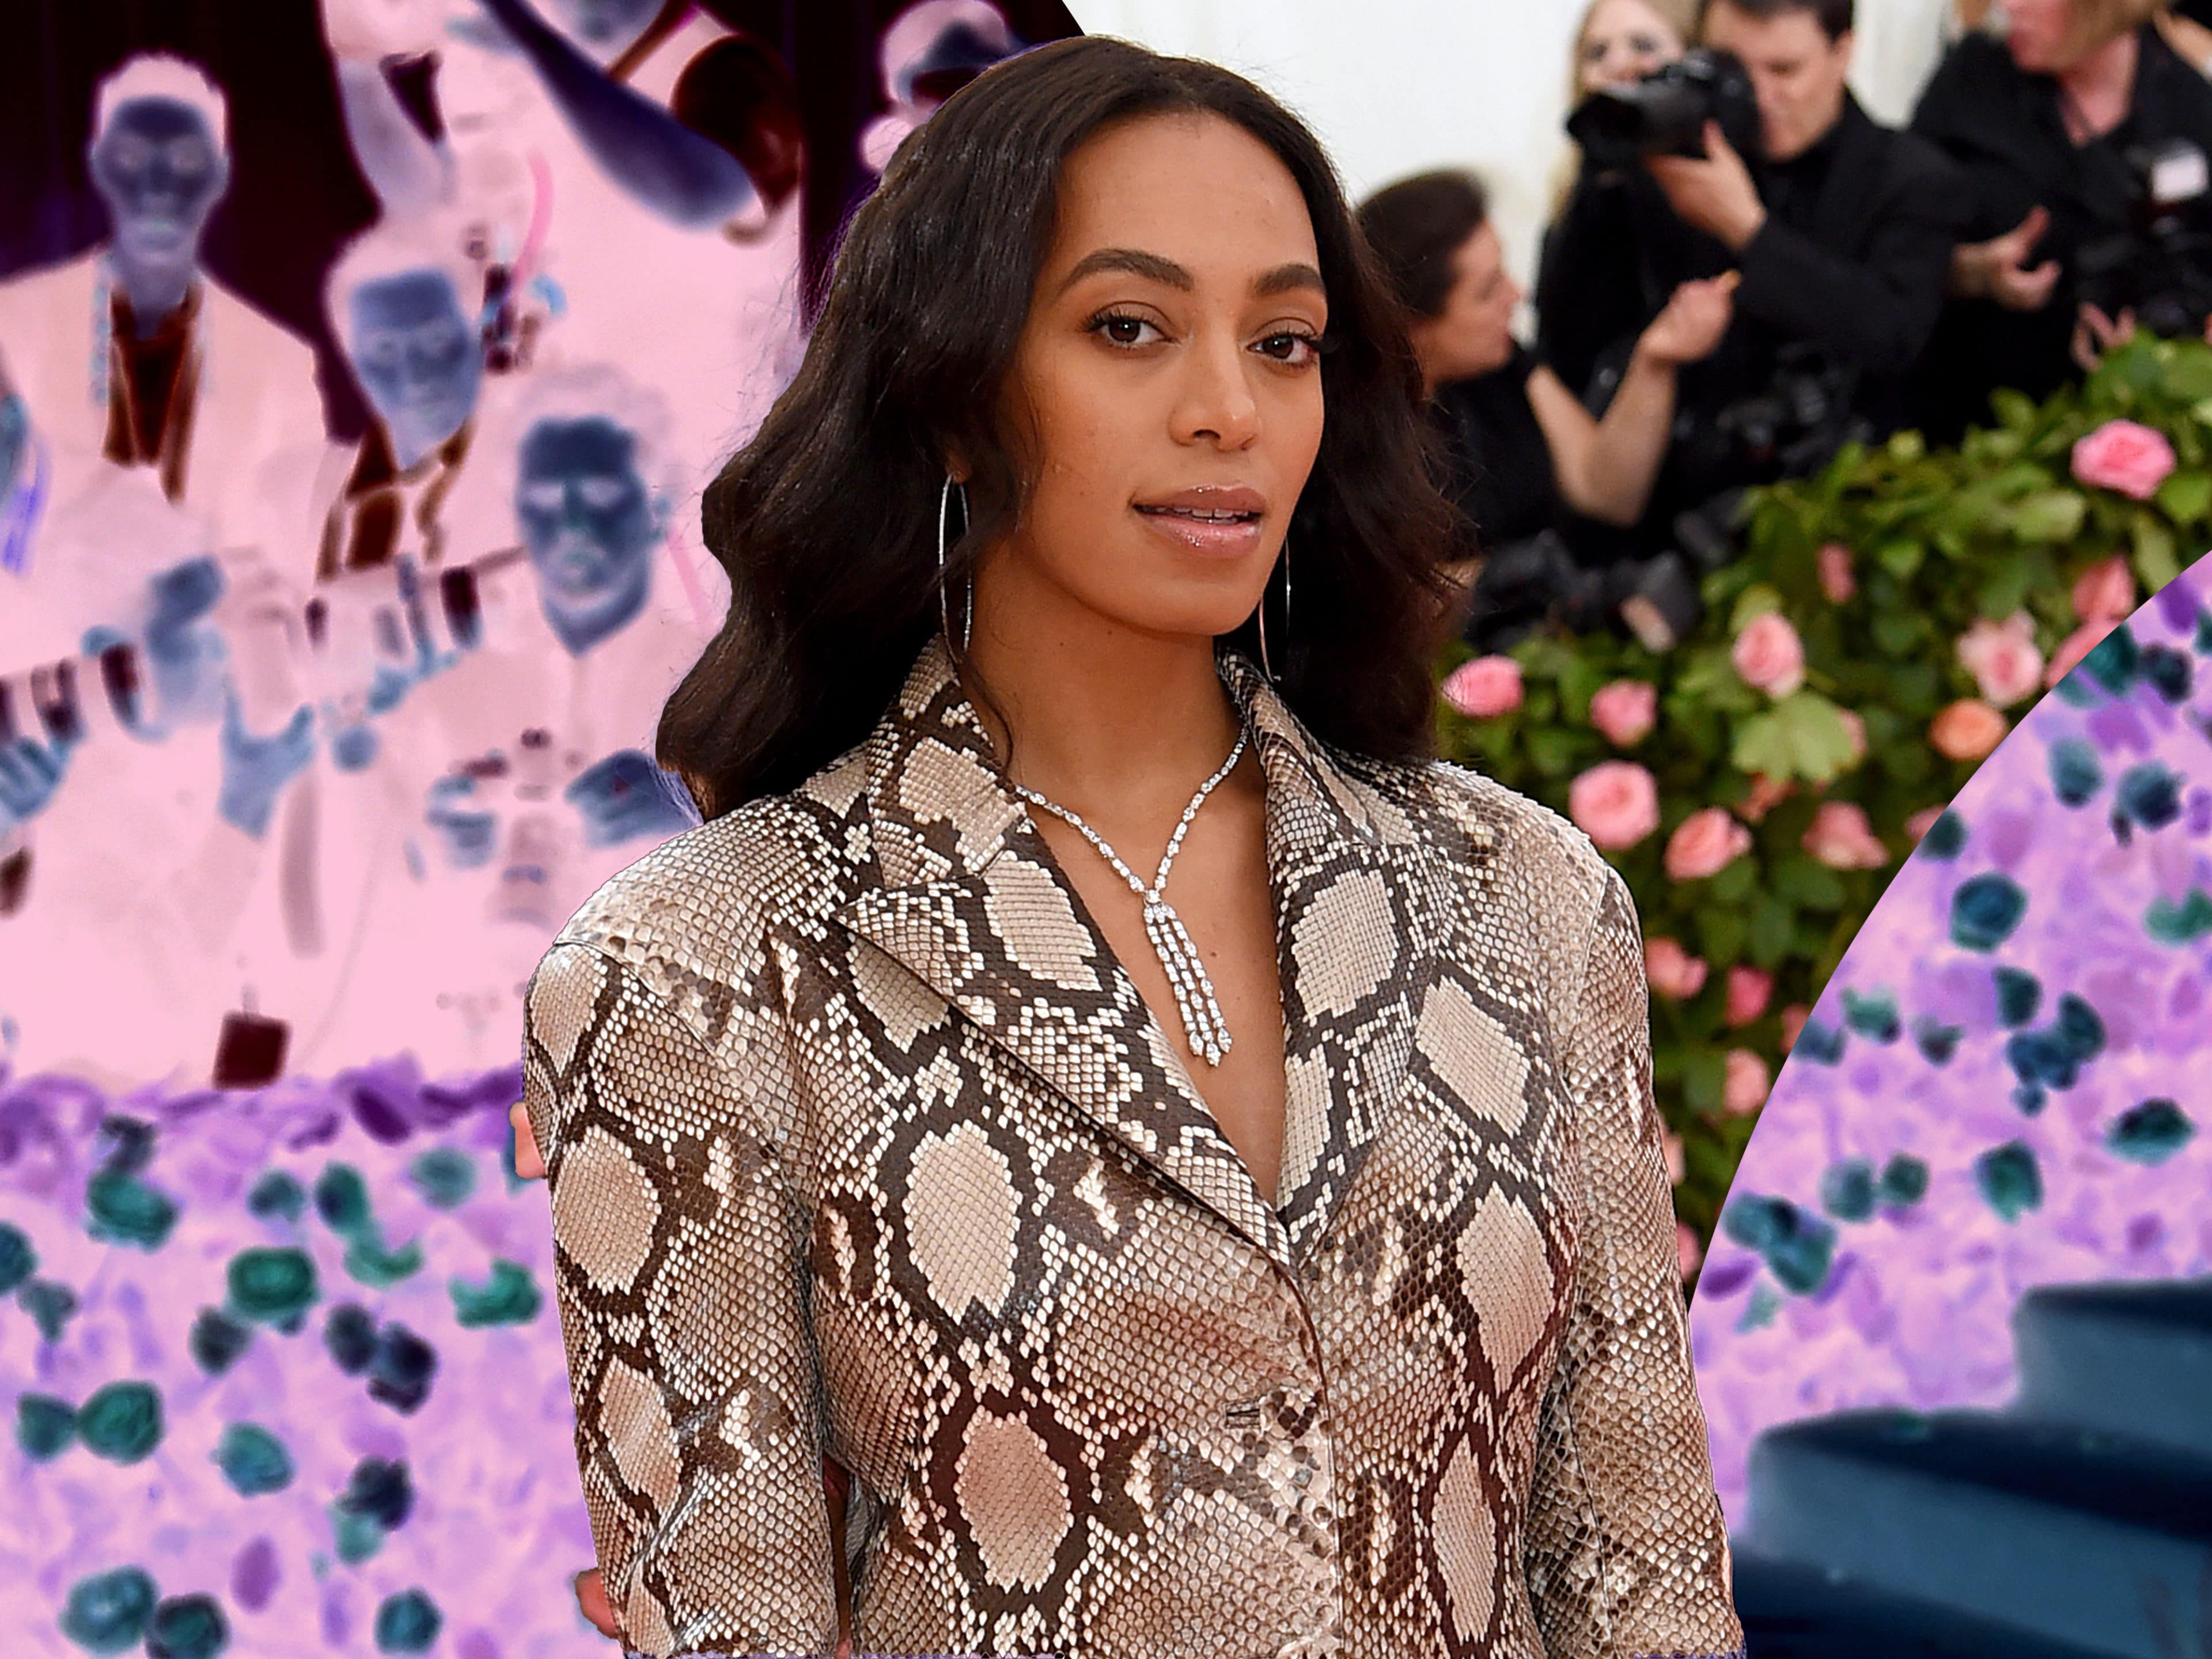 BEAUTY BREAKDOWN: The 5 Products You Need To Get Solange's Met Gala Blowout